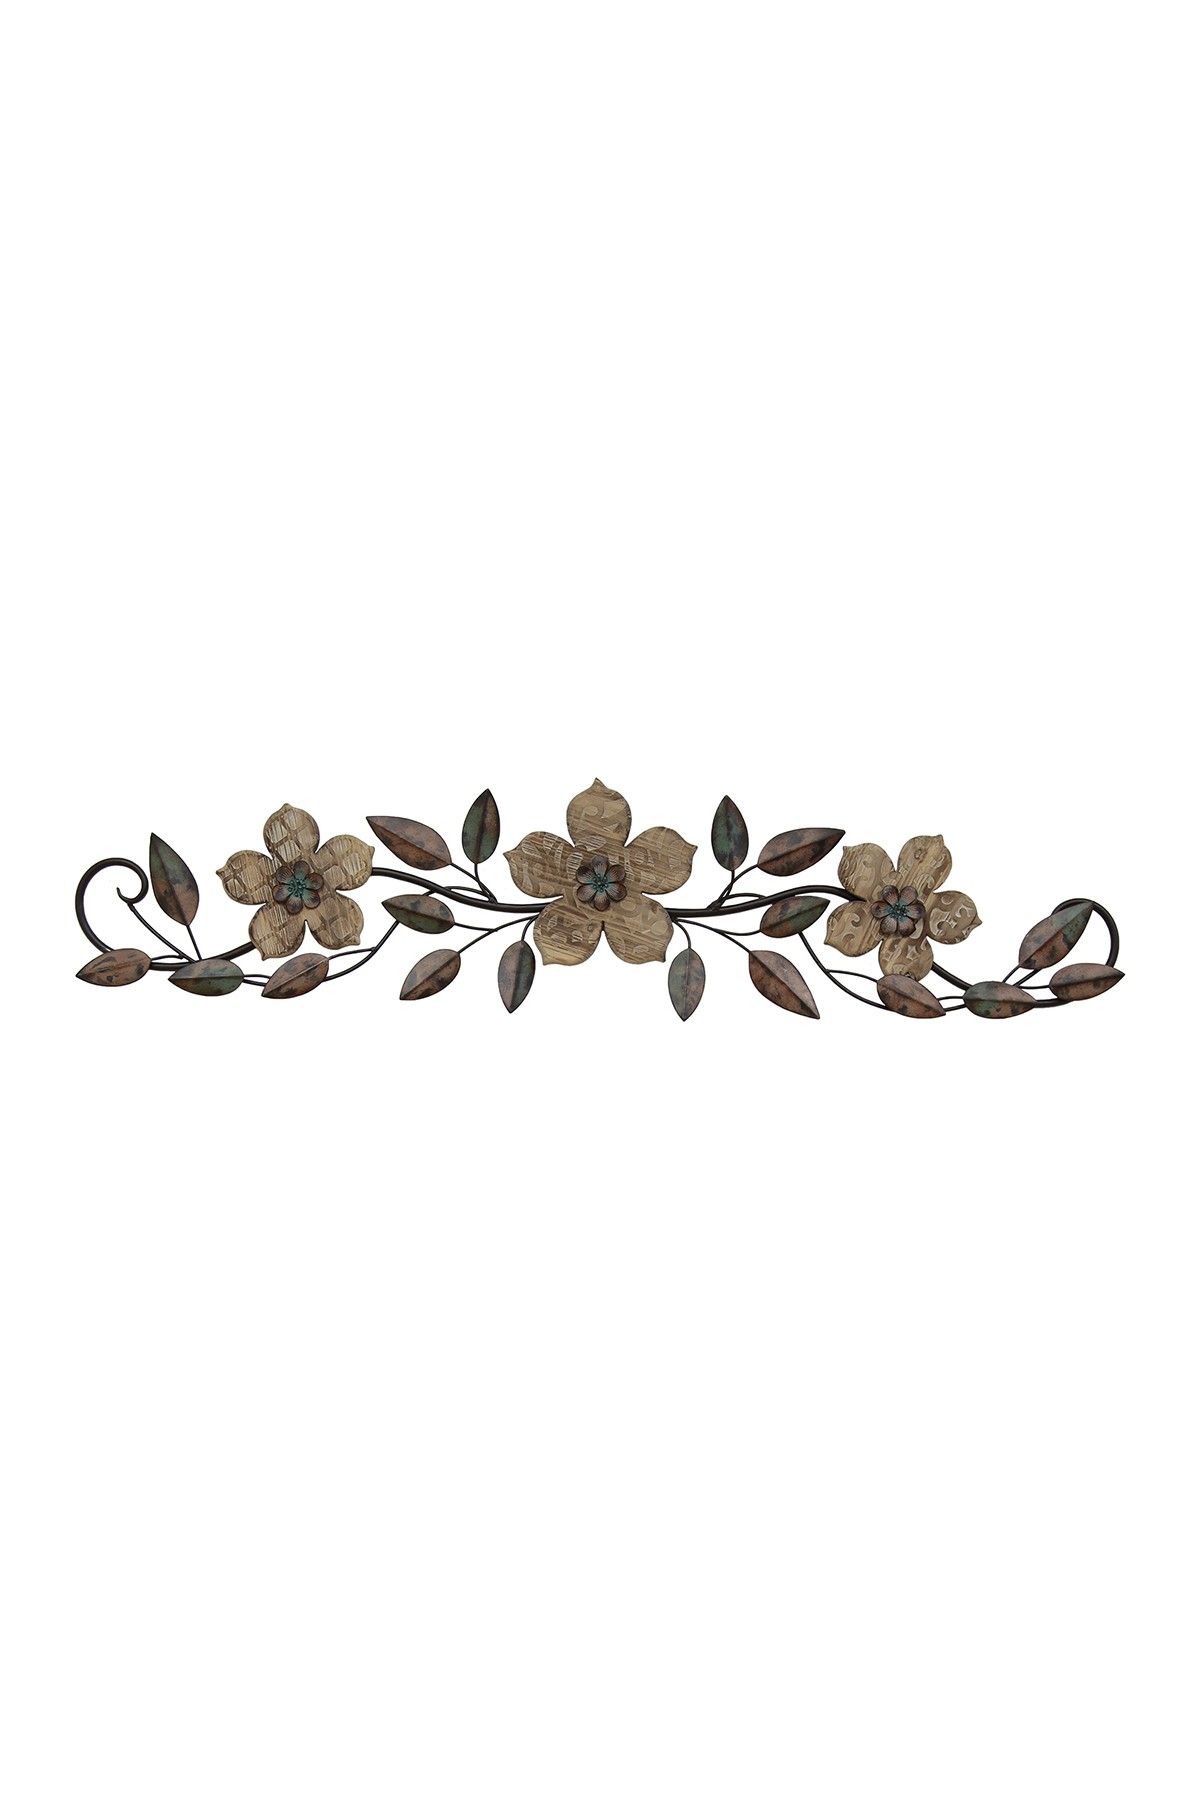 Stratton Home | Floral Patterned Wood Over The Door Multicolor Wall Decor |  Nordstrom Rack Regarding Floral Patterned Over The Door Wall Decor (Photo 3 of 30)